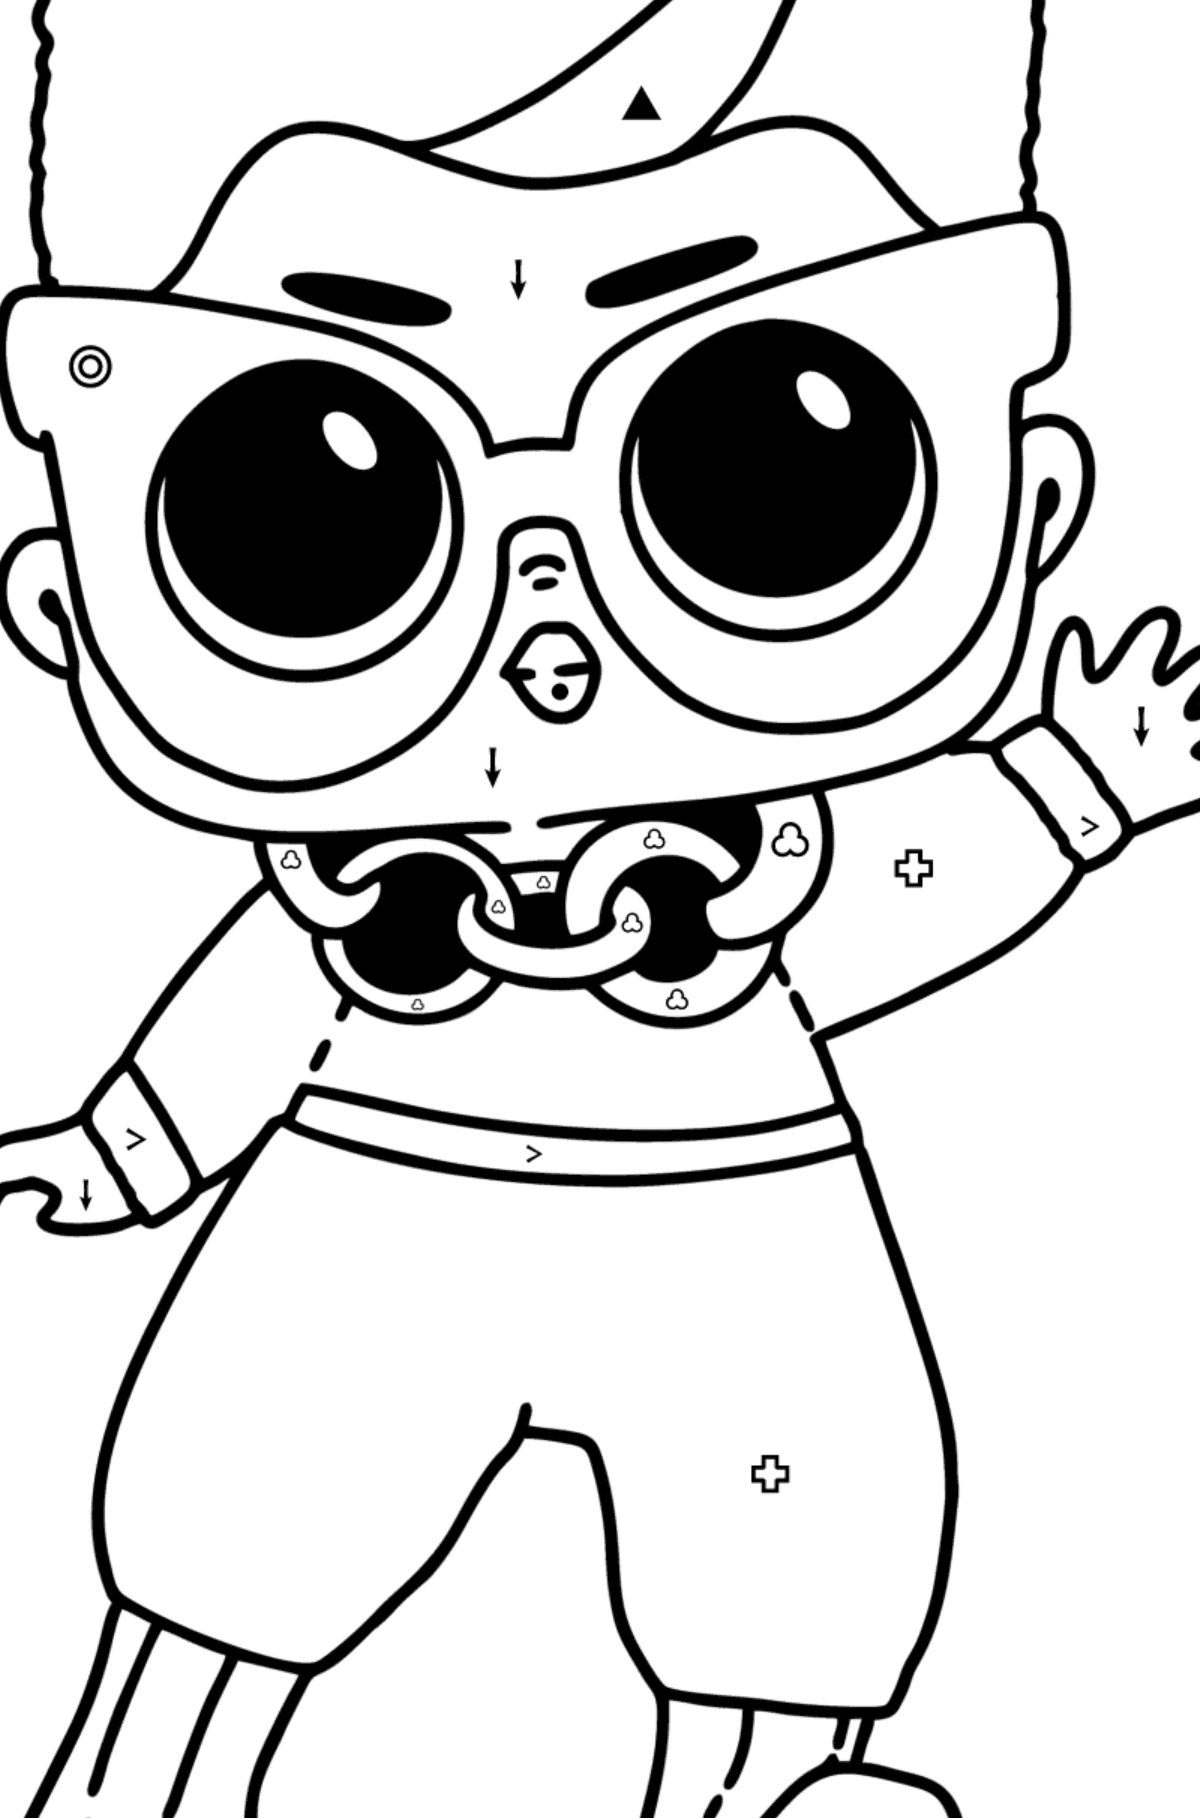 LOL Surprise Swaggie Doll Boy coloring page - Coloring by Symbols and Geometric Shapes for Kids